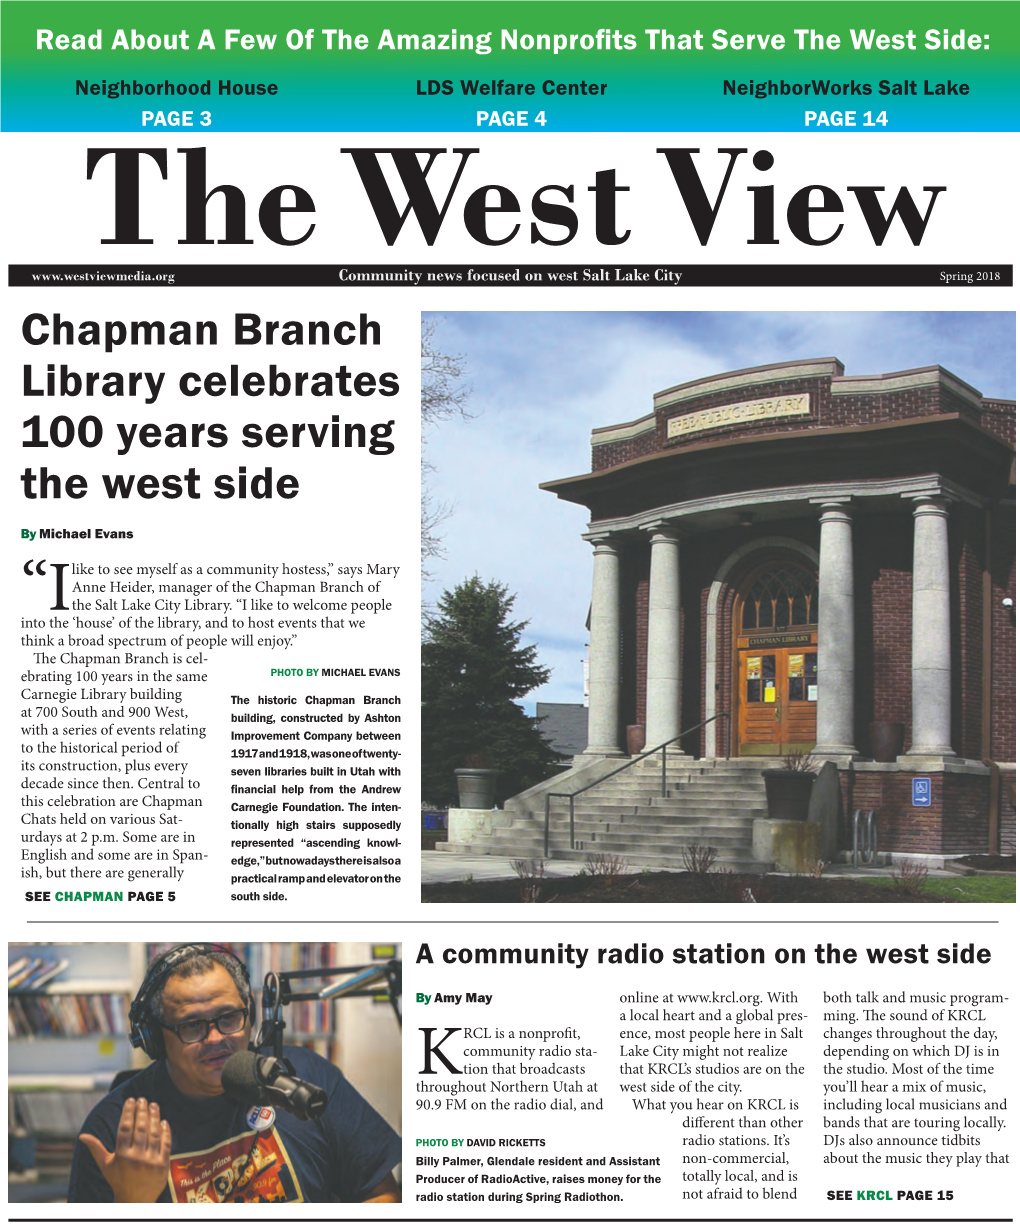 Chapman Branch Library Celebrates 100 Years Serving the West Side